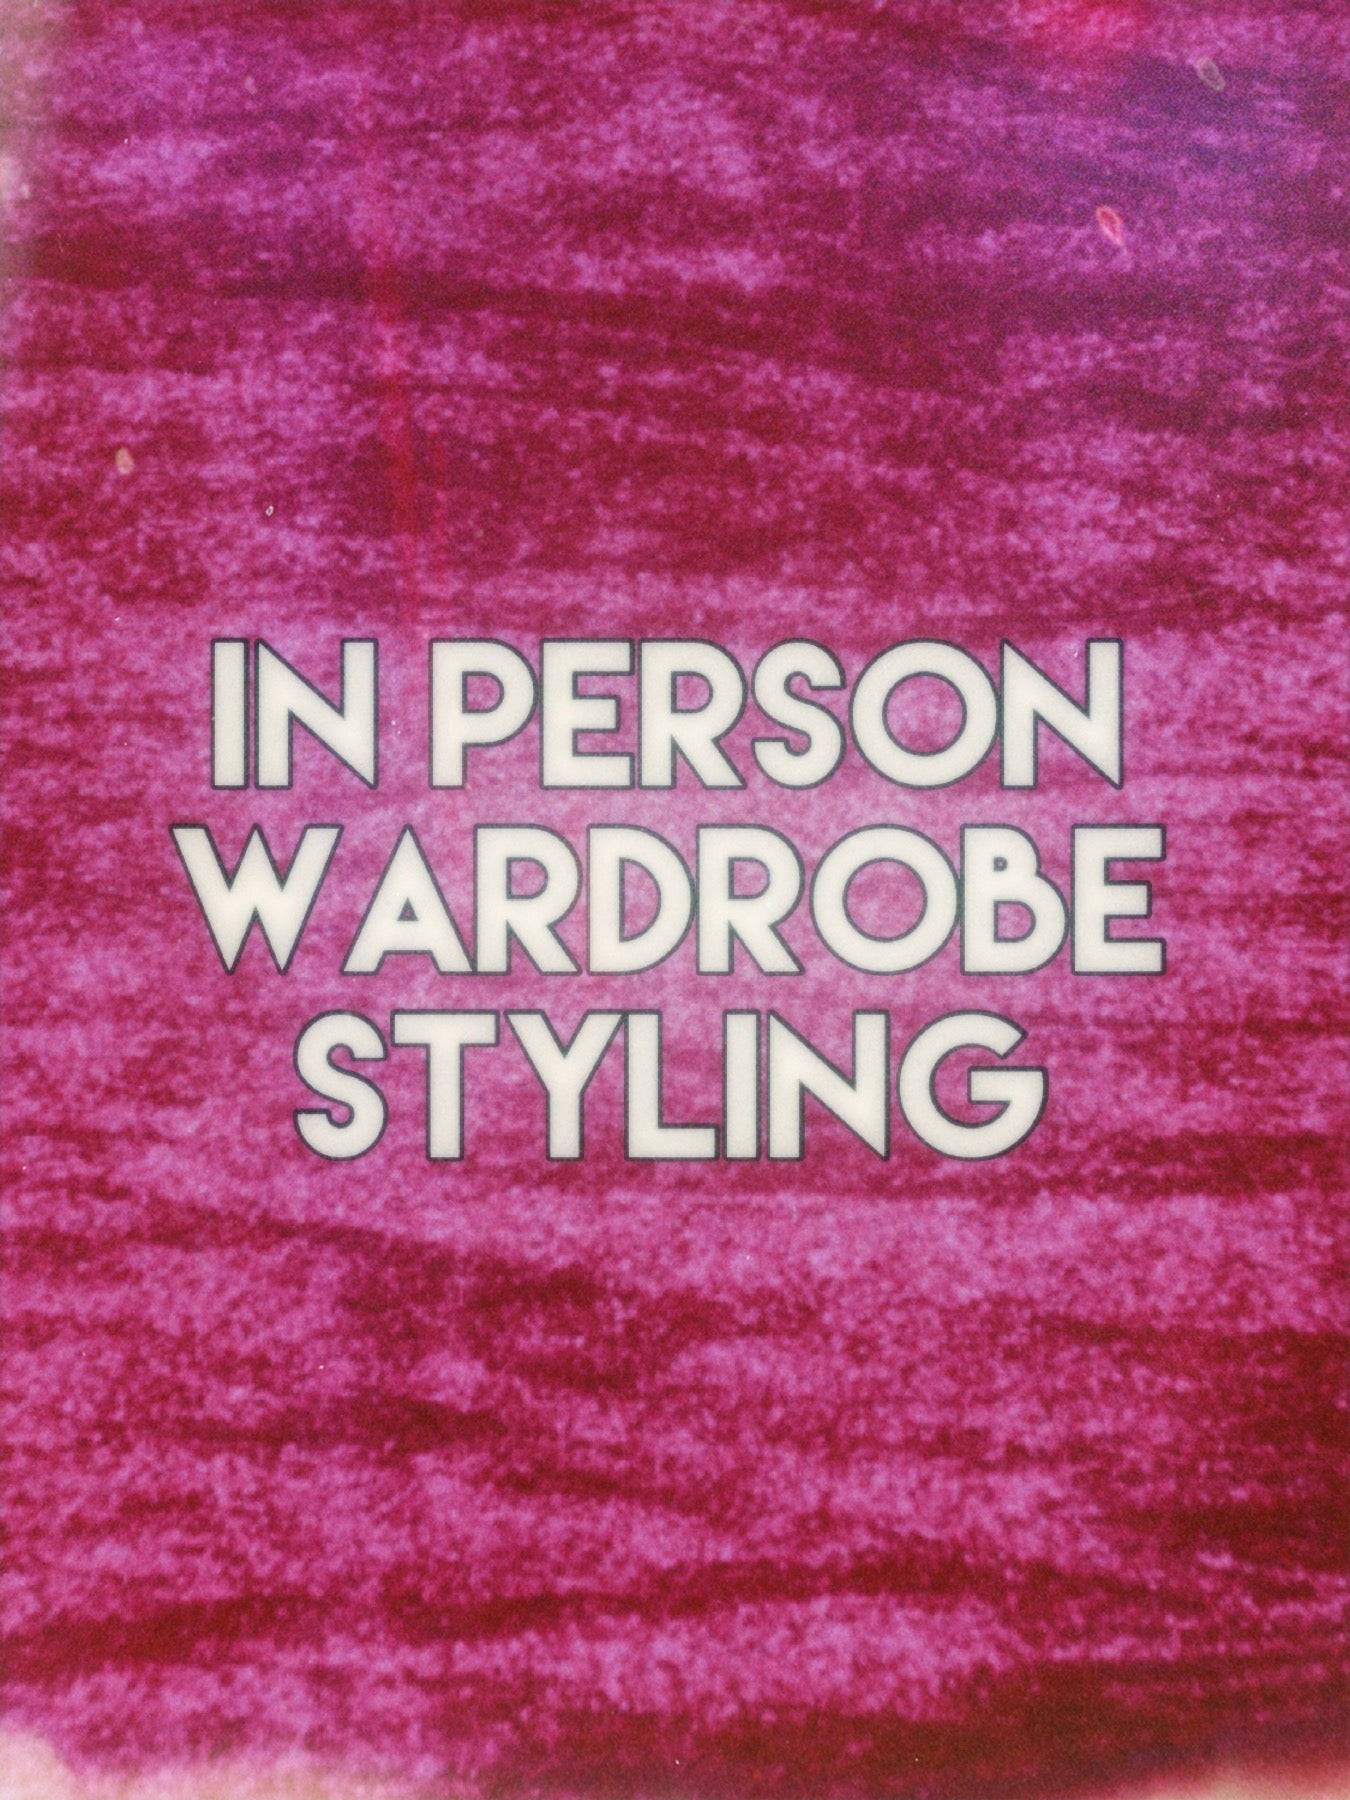 in person wardrobe styling